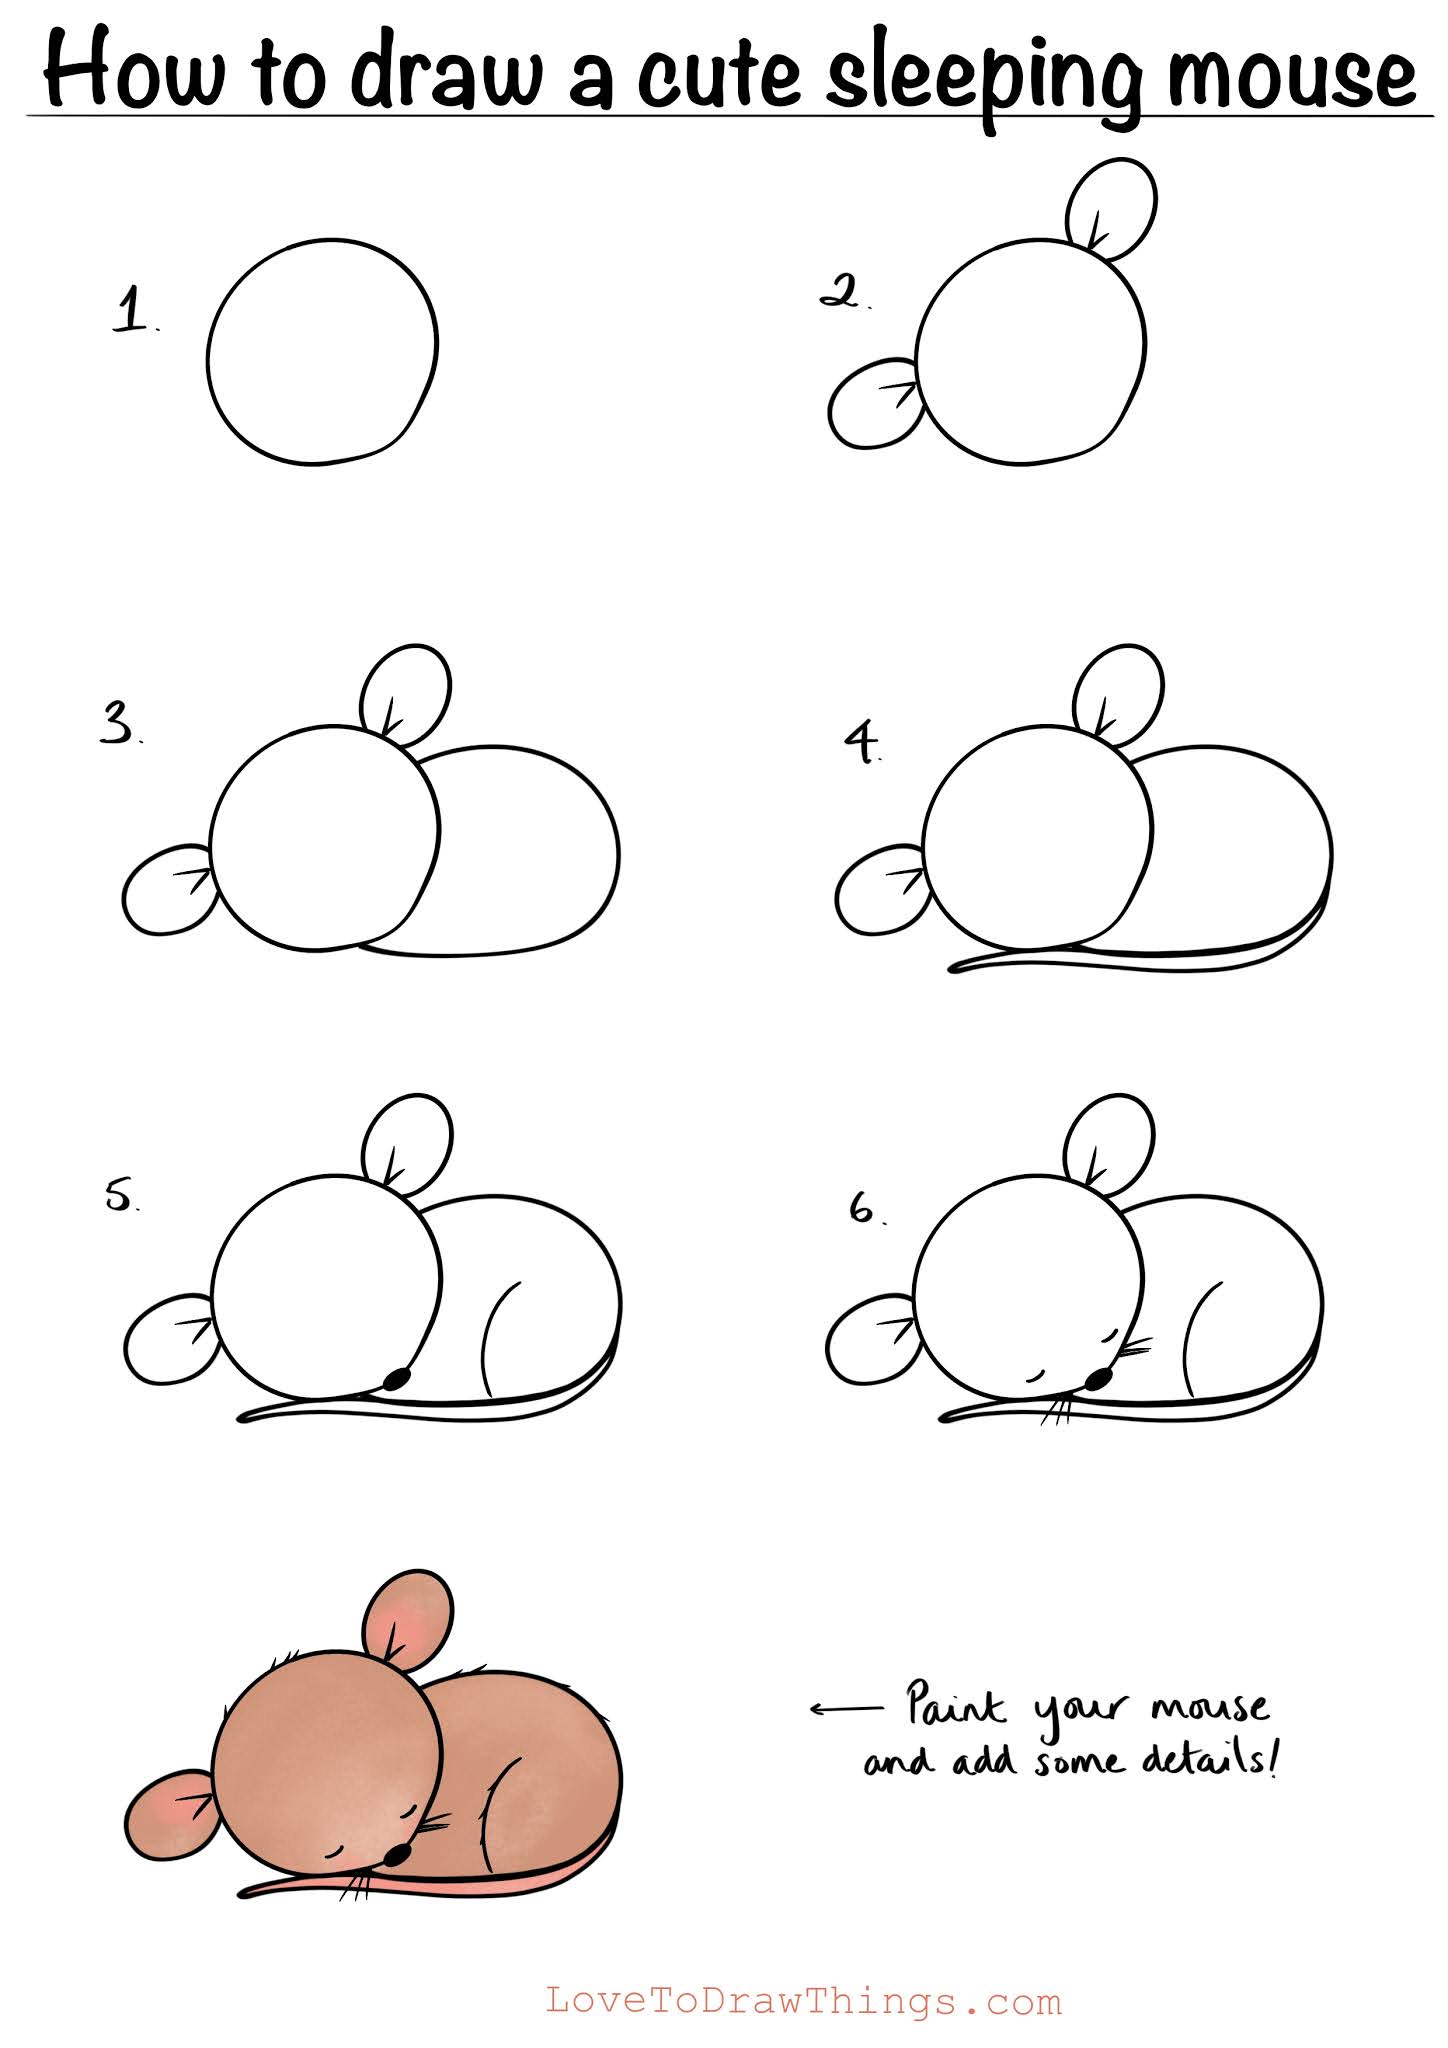 How to draw a cute sleeping mouse in 6 steps